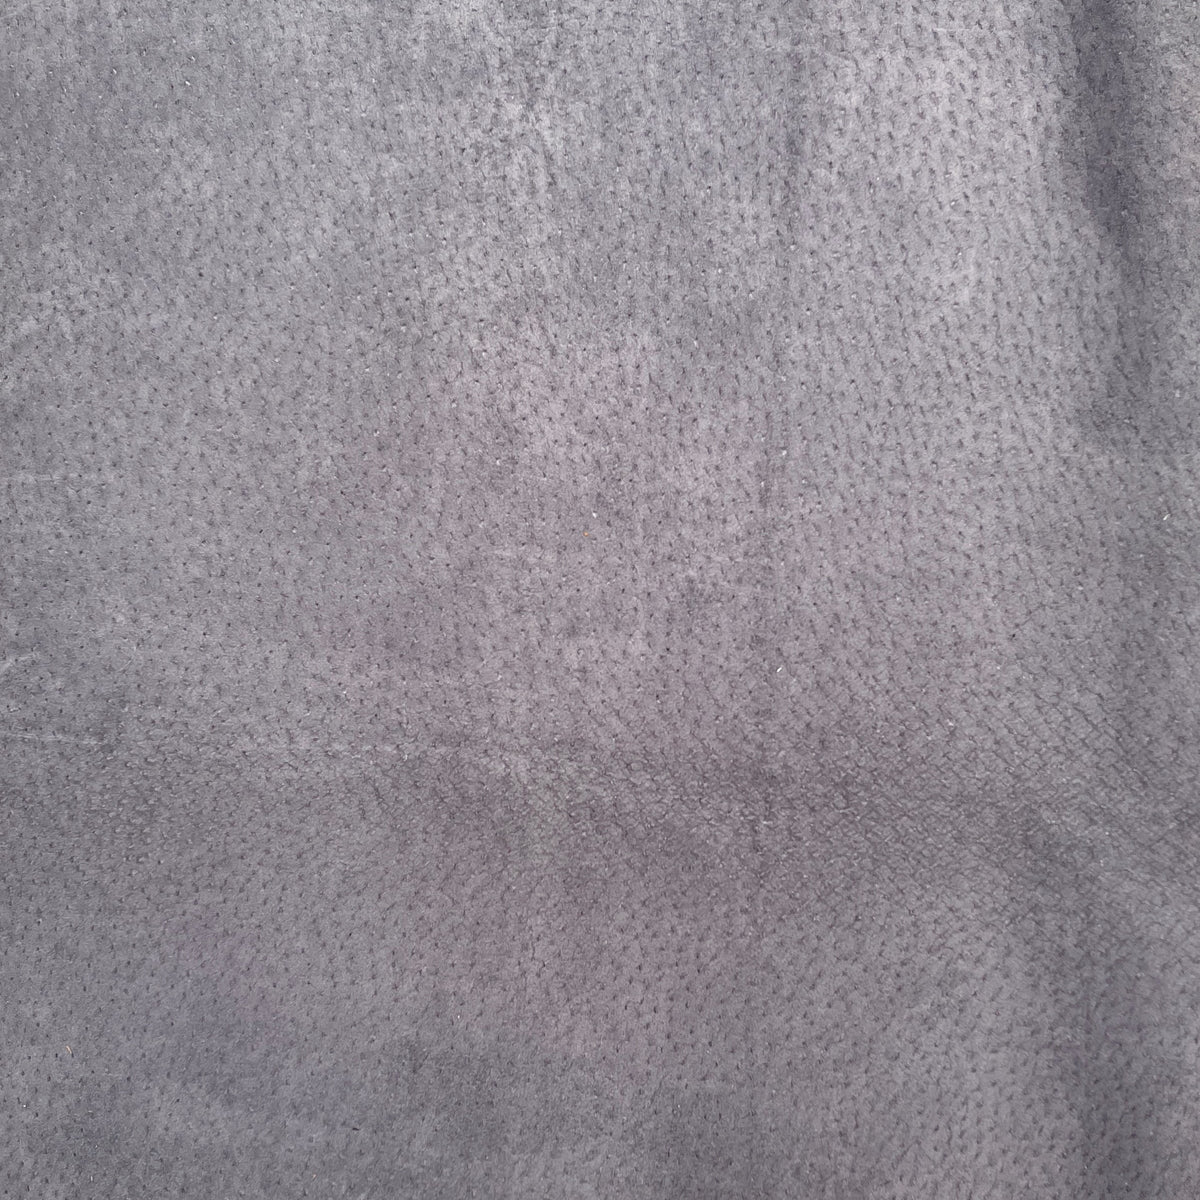 Pig Skin Suede | Grey | 0.6 mm | 8 sq.ft | From $25 ea.